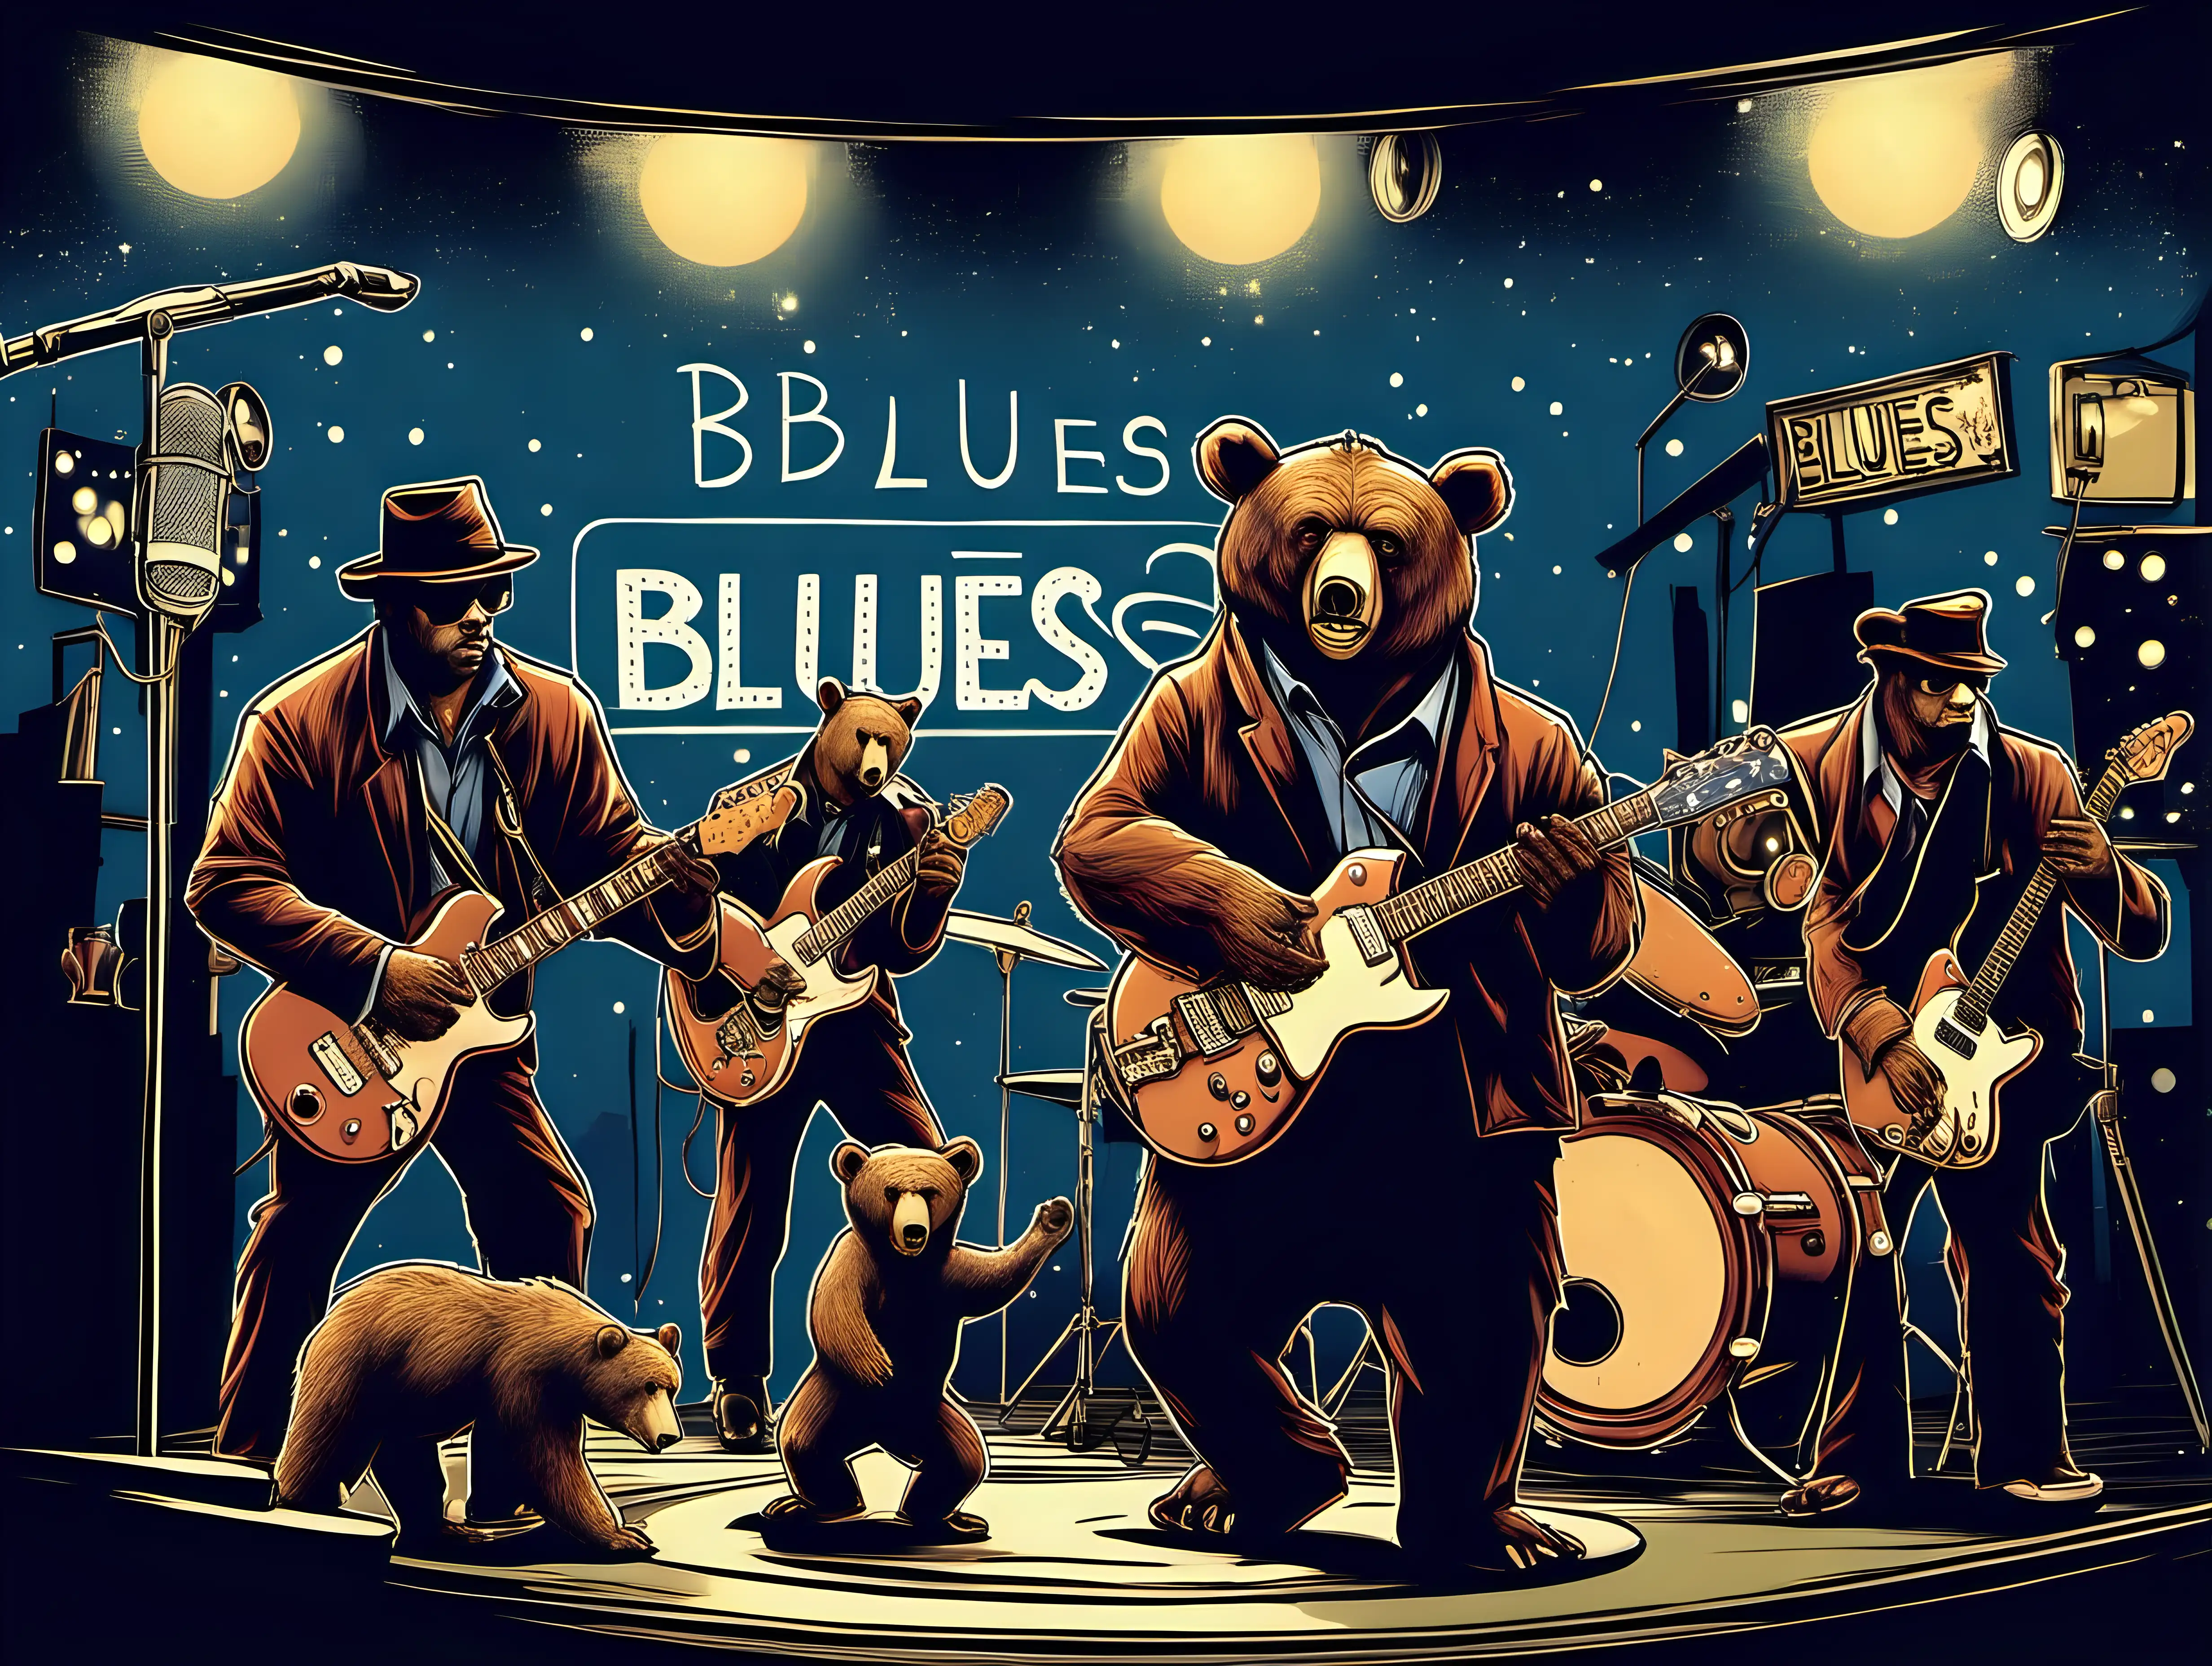 Night Club Blues Band Performance with Bear Guitarist